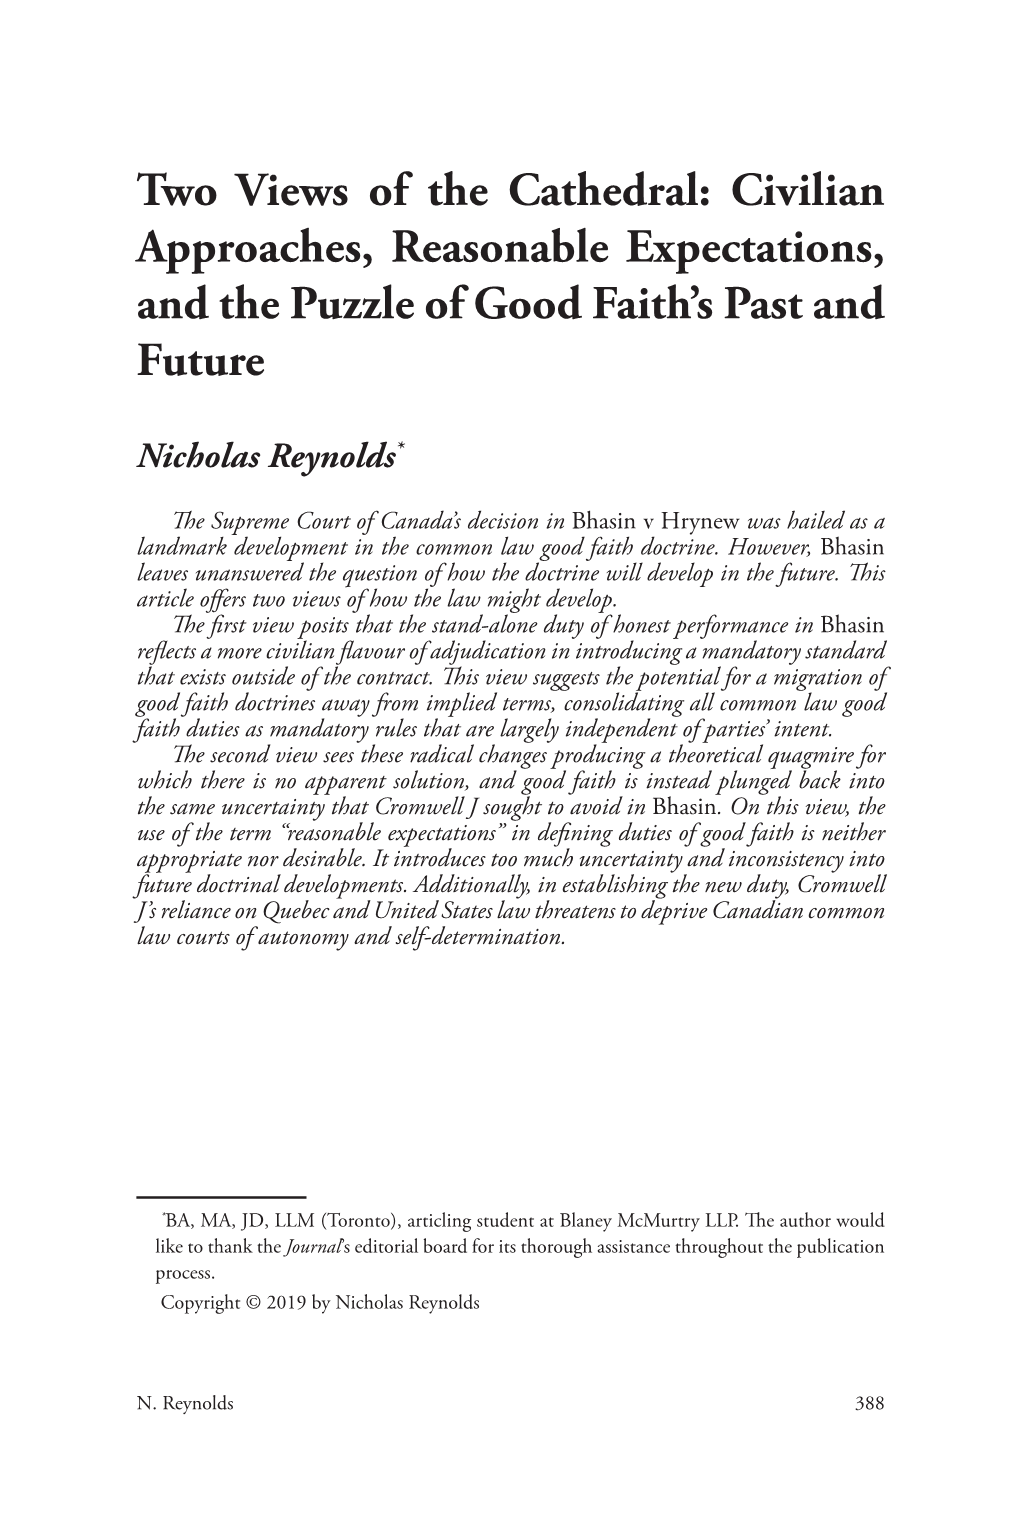 Civilian Approaches, Reasonable Expectations, and the Puzzle of Good Faith's Past and Future